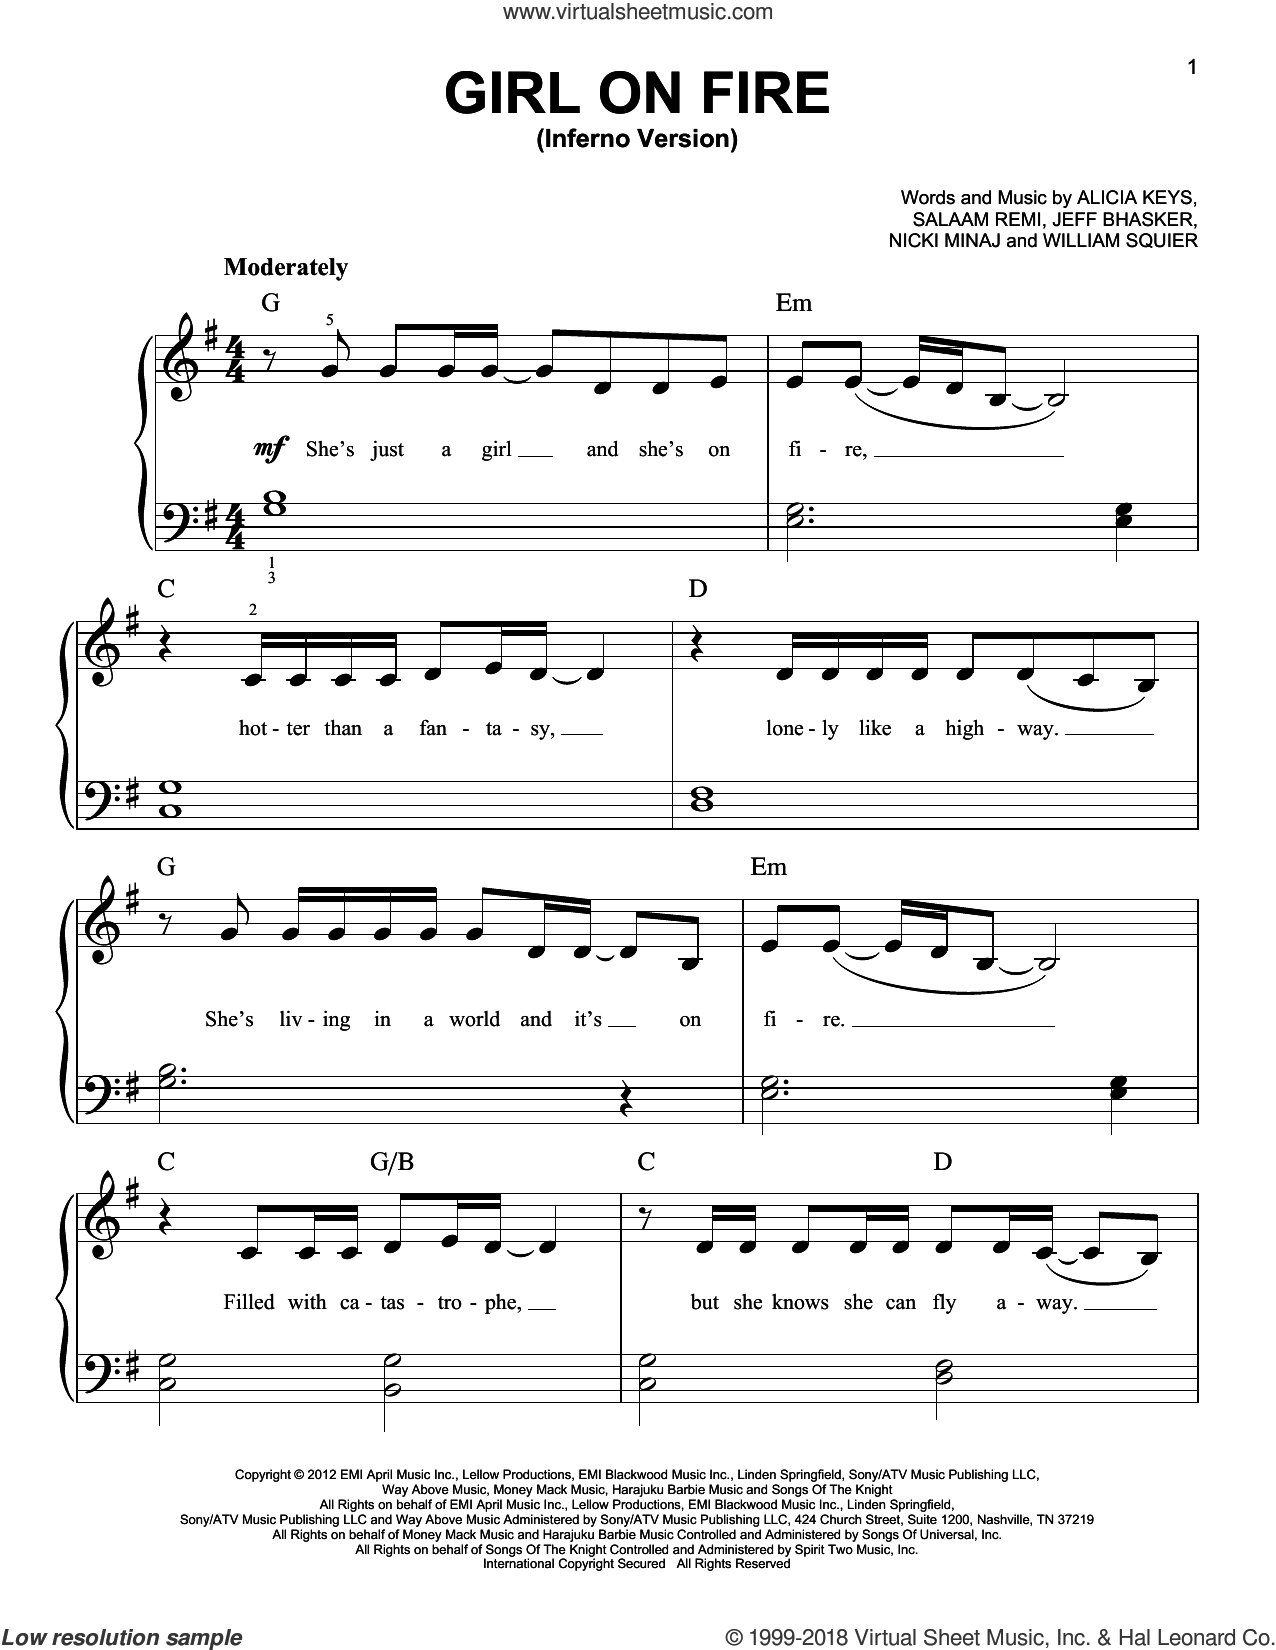 Keys - Girl On Fire sheet music for piano solo [PDF-interactive]1276 x 1650